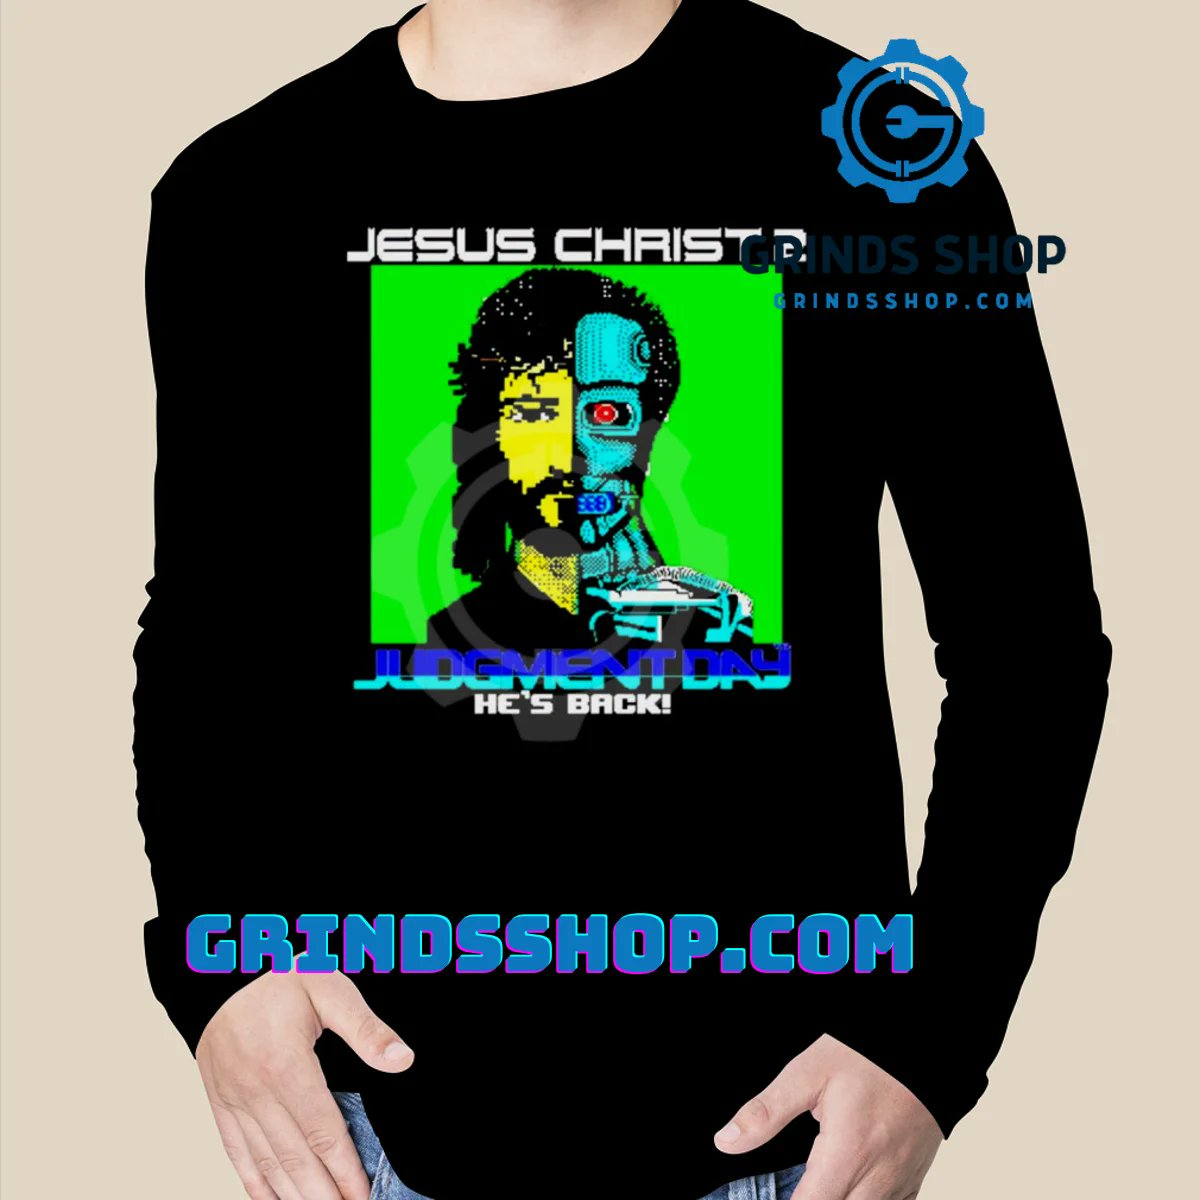 Jesus Christ 2 Judgement Day he’s back shirt From: 18.99
Buy it here: grindsshop.com/product/jesus-…

#JesusChrist2 #JudgementDay #HesBack #Shirt #ChristianApparel #ReligiousClothing #FaithFashion